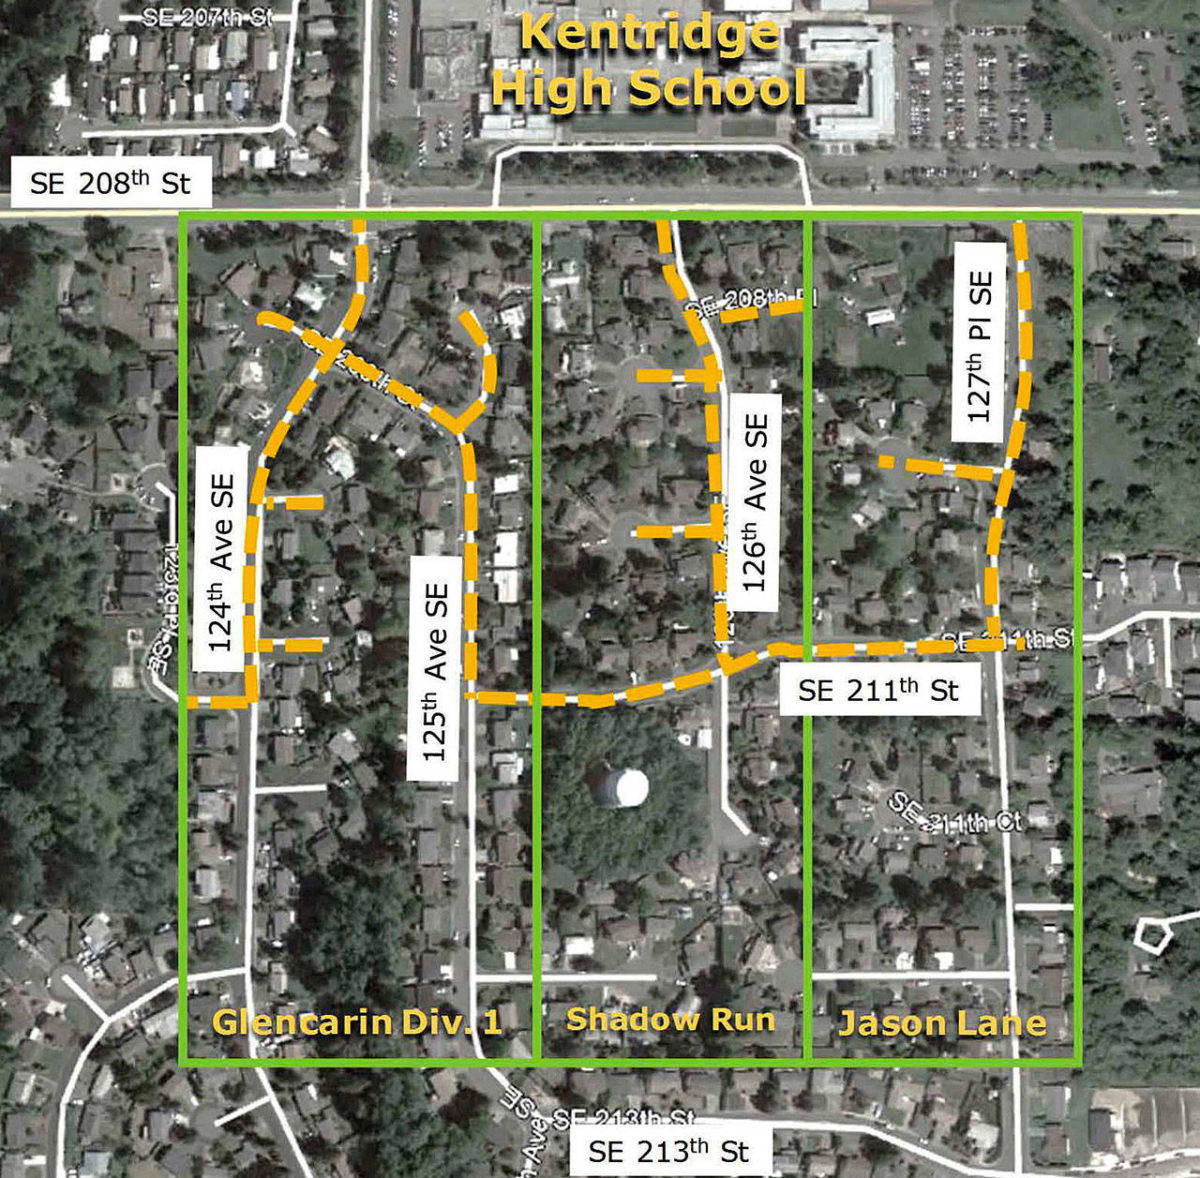 A yellow-orange line shows where the city of Kent plans to restrict parking in neighborhoods near Kentridge High School to stop students from parking on the streets. COURTESY GRAPHIC, City of Kent